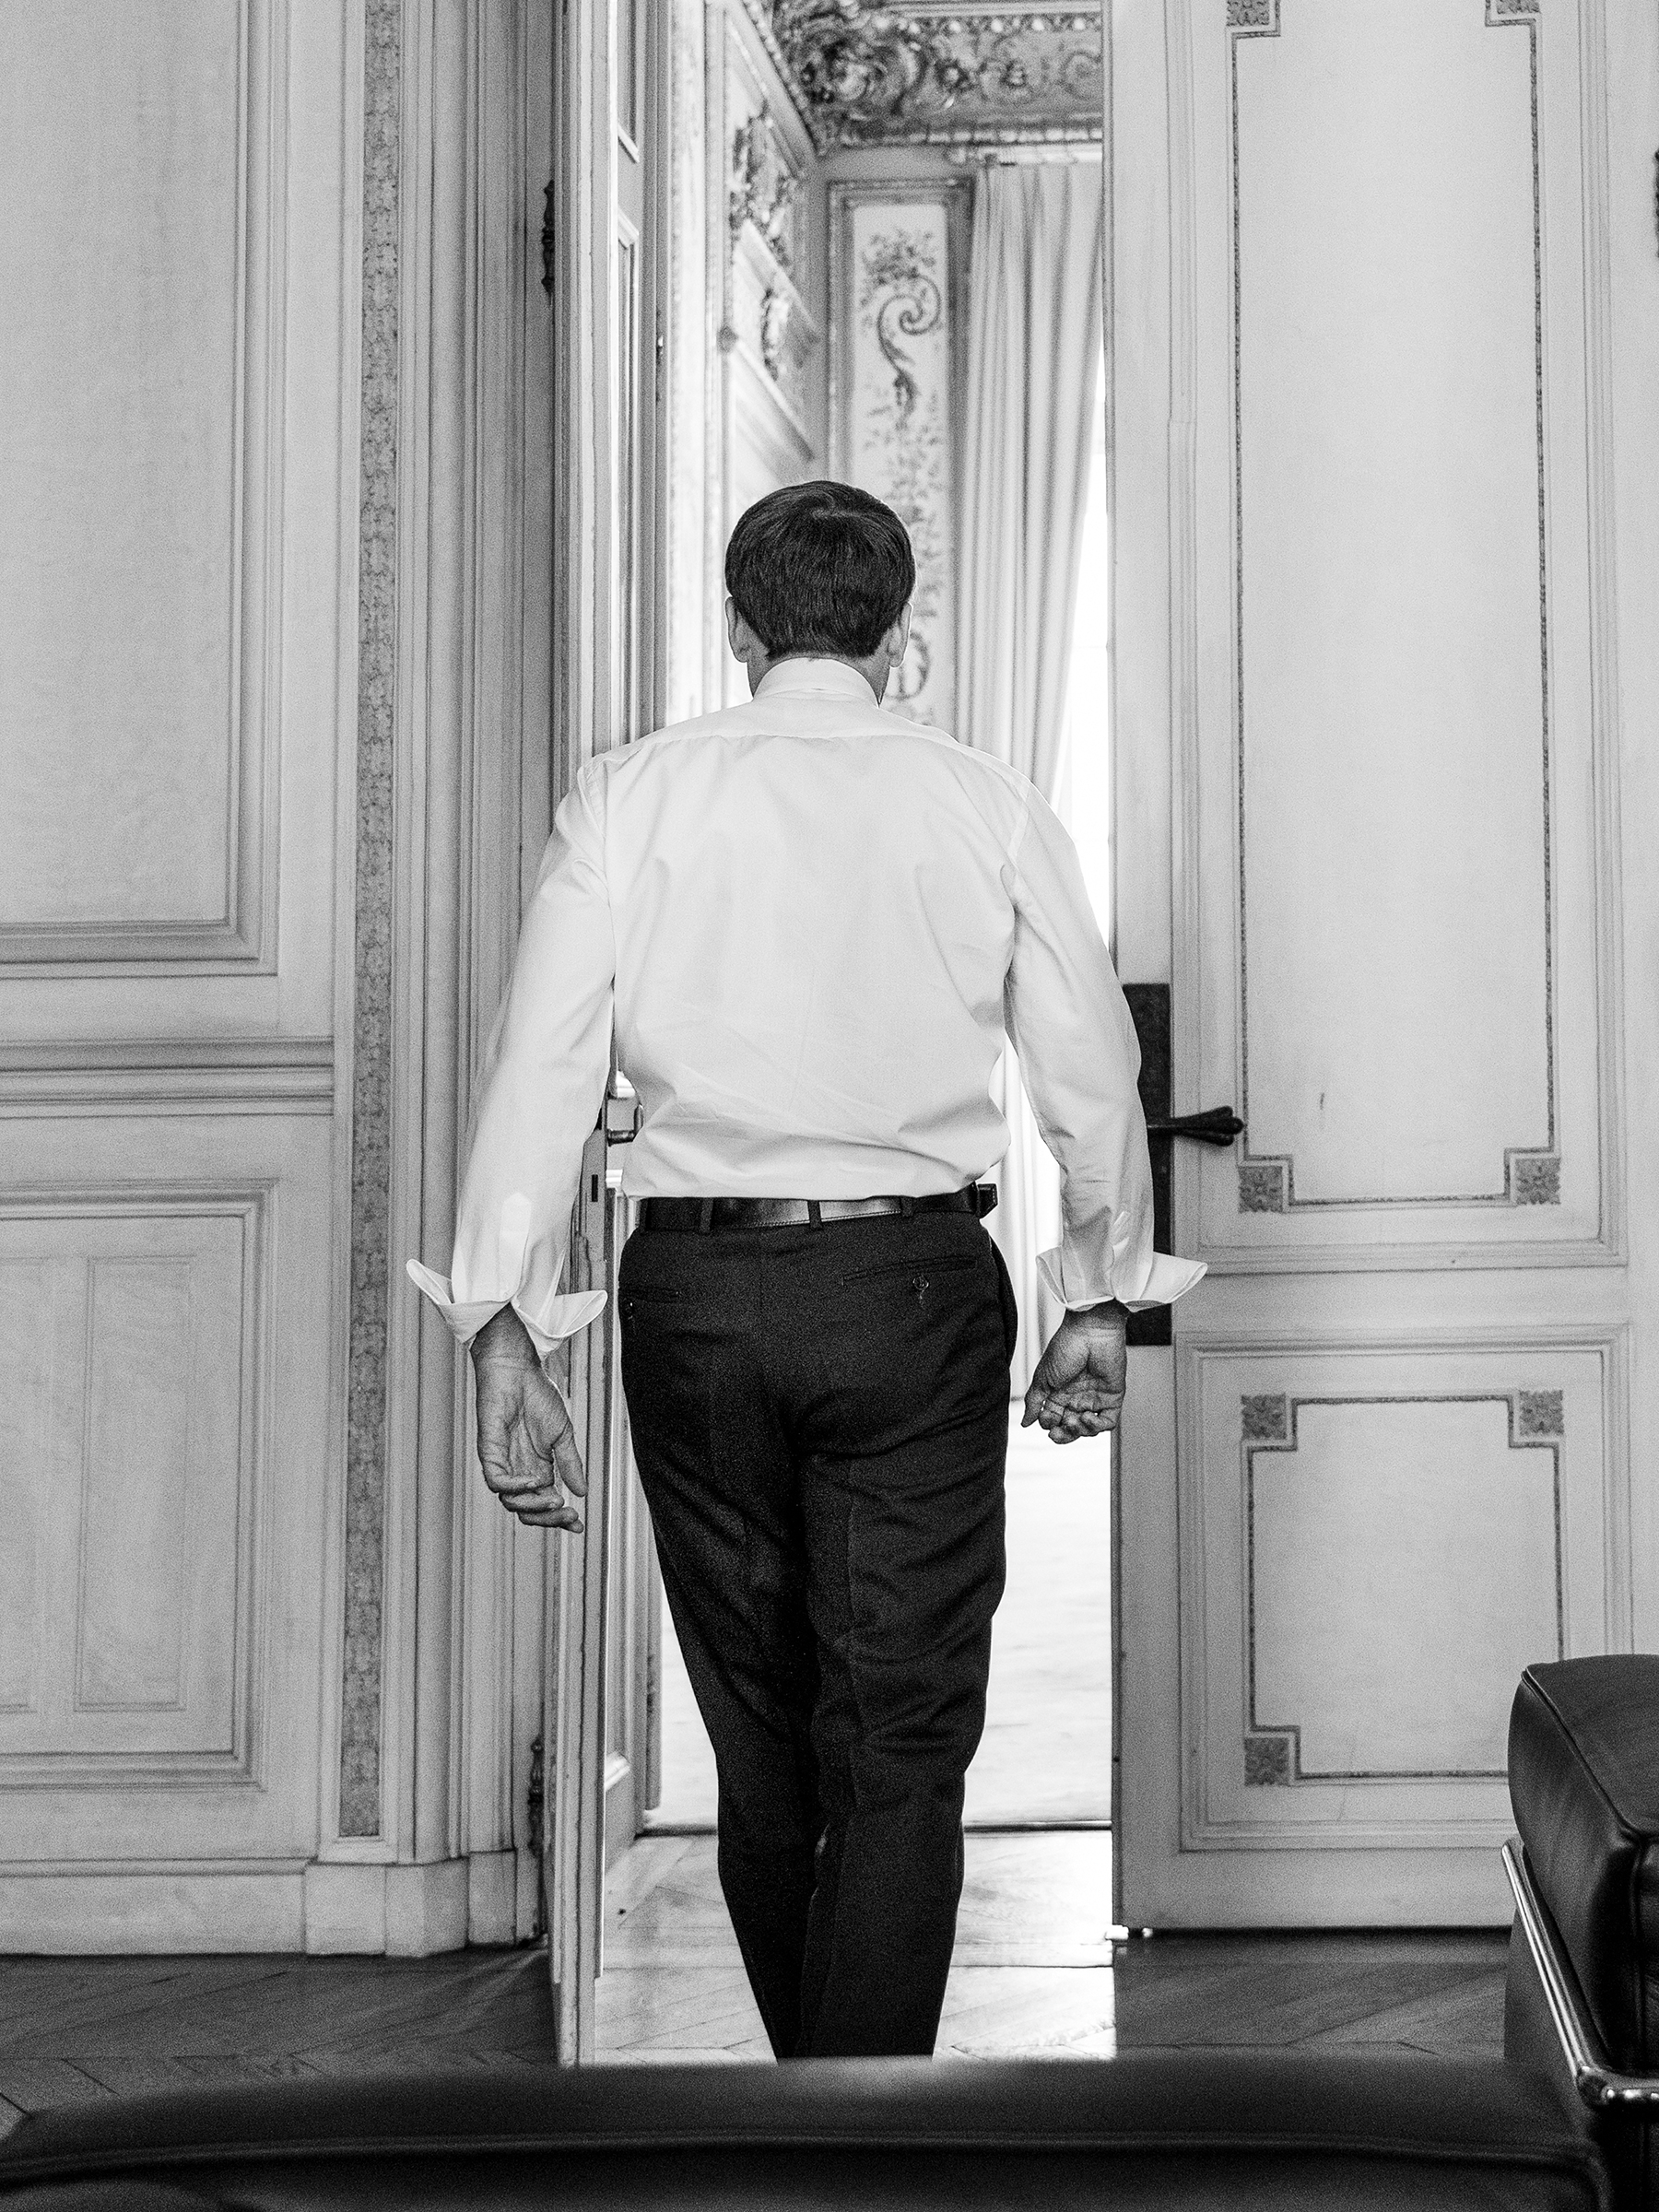 Macron steps out of a high-level meeting in the Élysée Palace in Paris on Sept. 9 (Christopher Anderson—Magnum Photos for TIME)